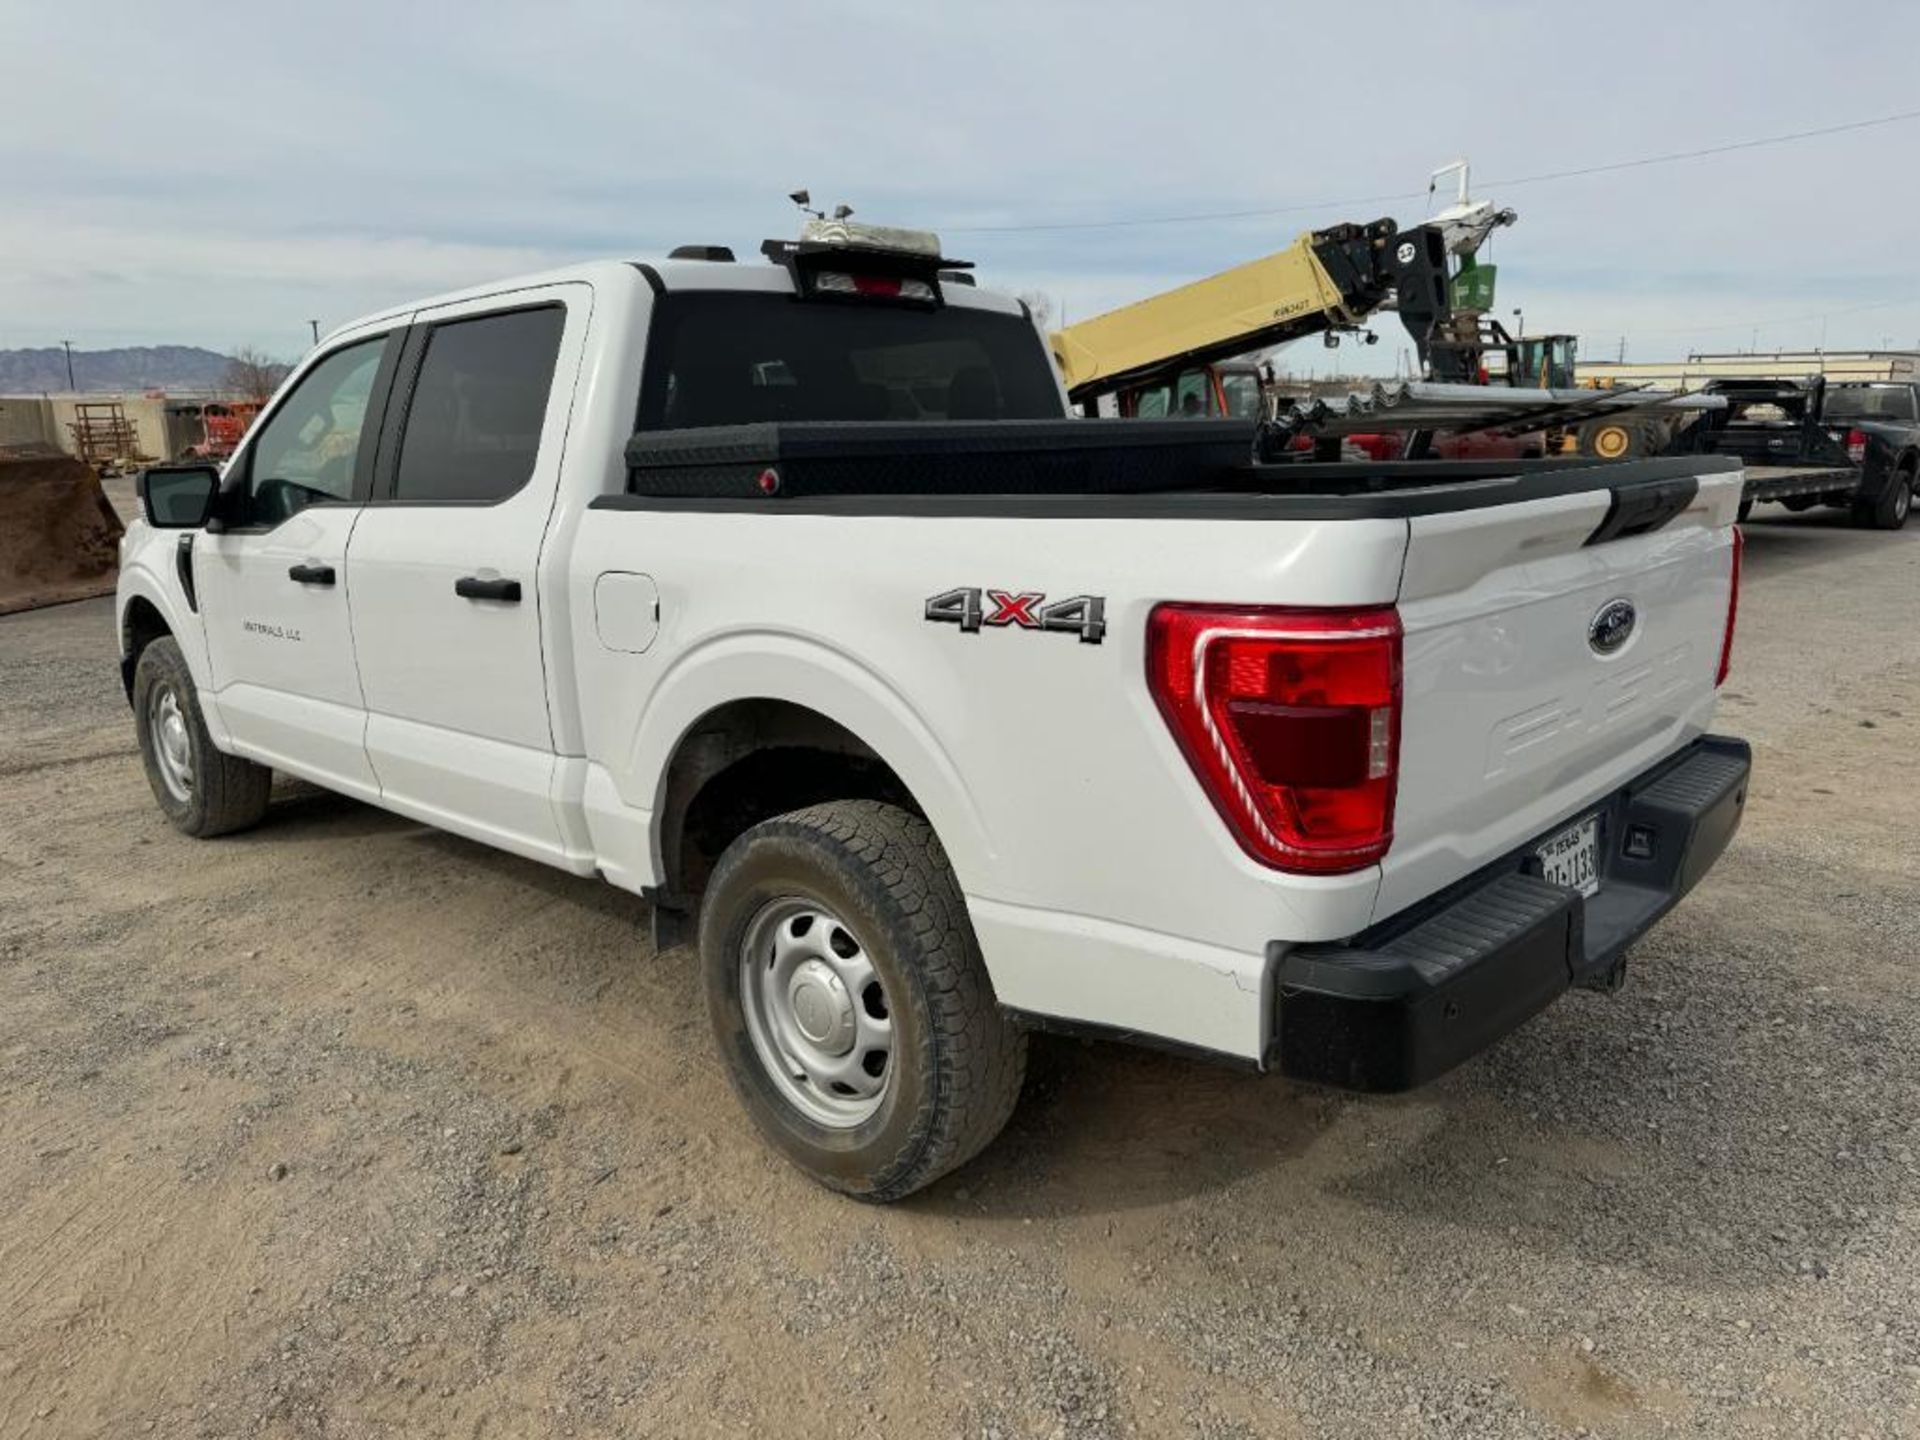 2021 Ford F150 XL Crew Cab 4X4 Truck - Image 2 of 19